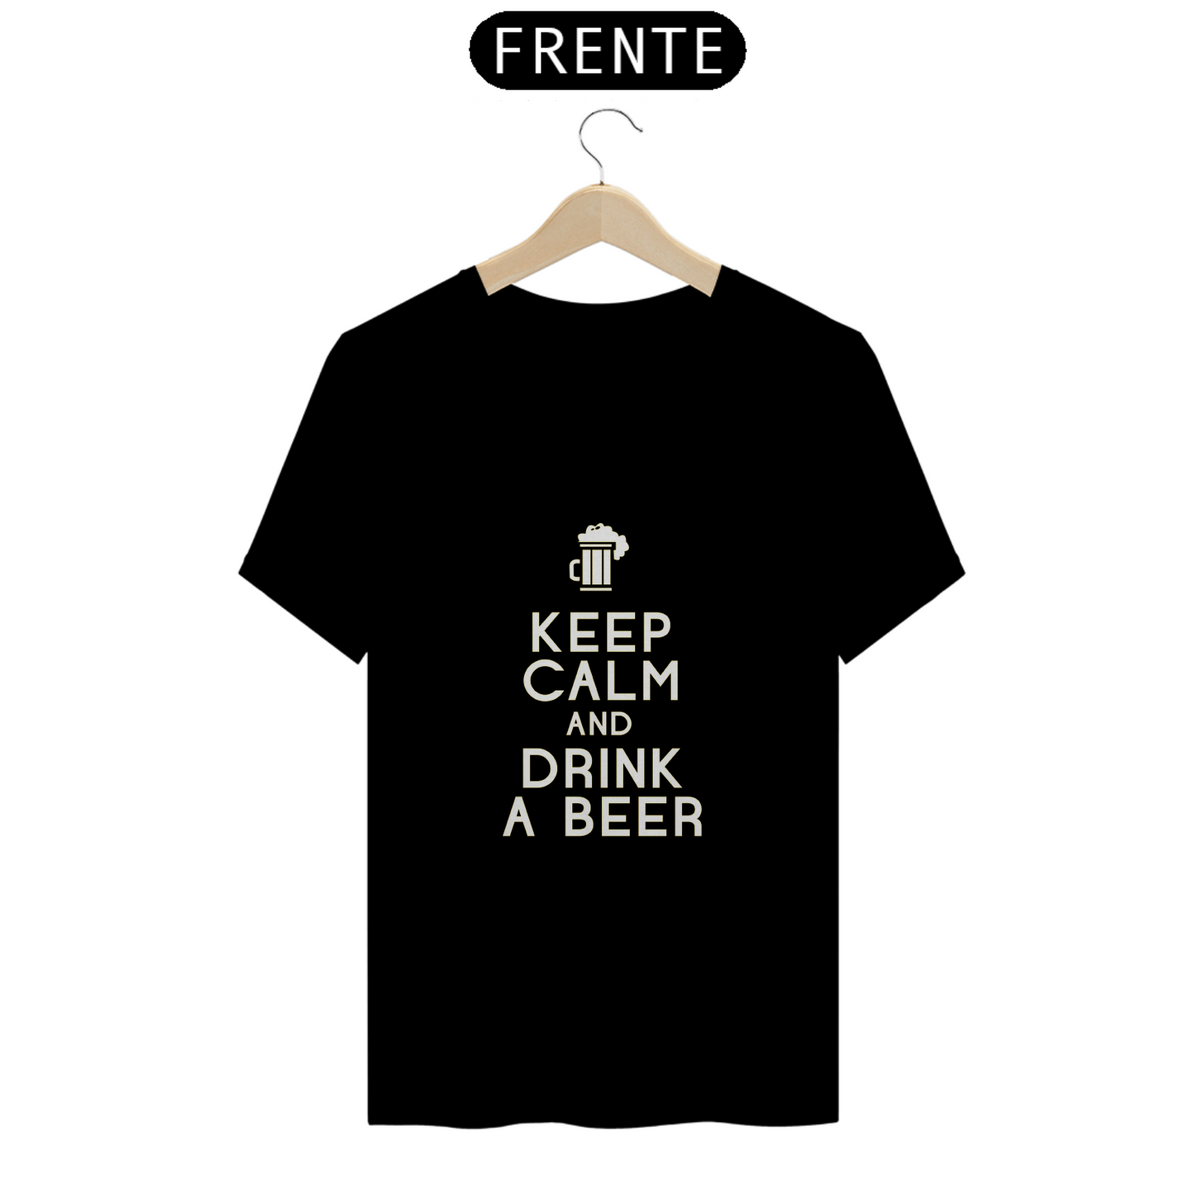 Nome do produto: Keep calm and drink a beer